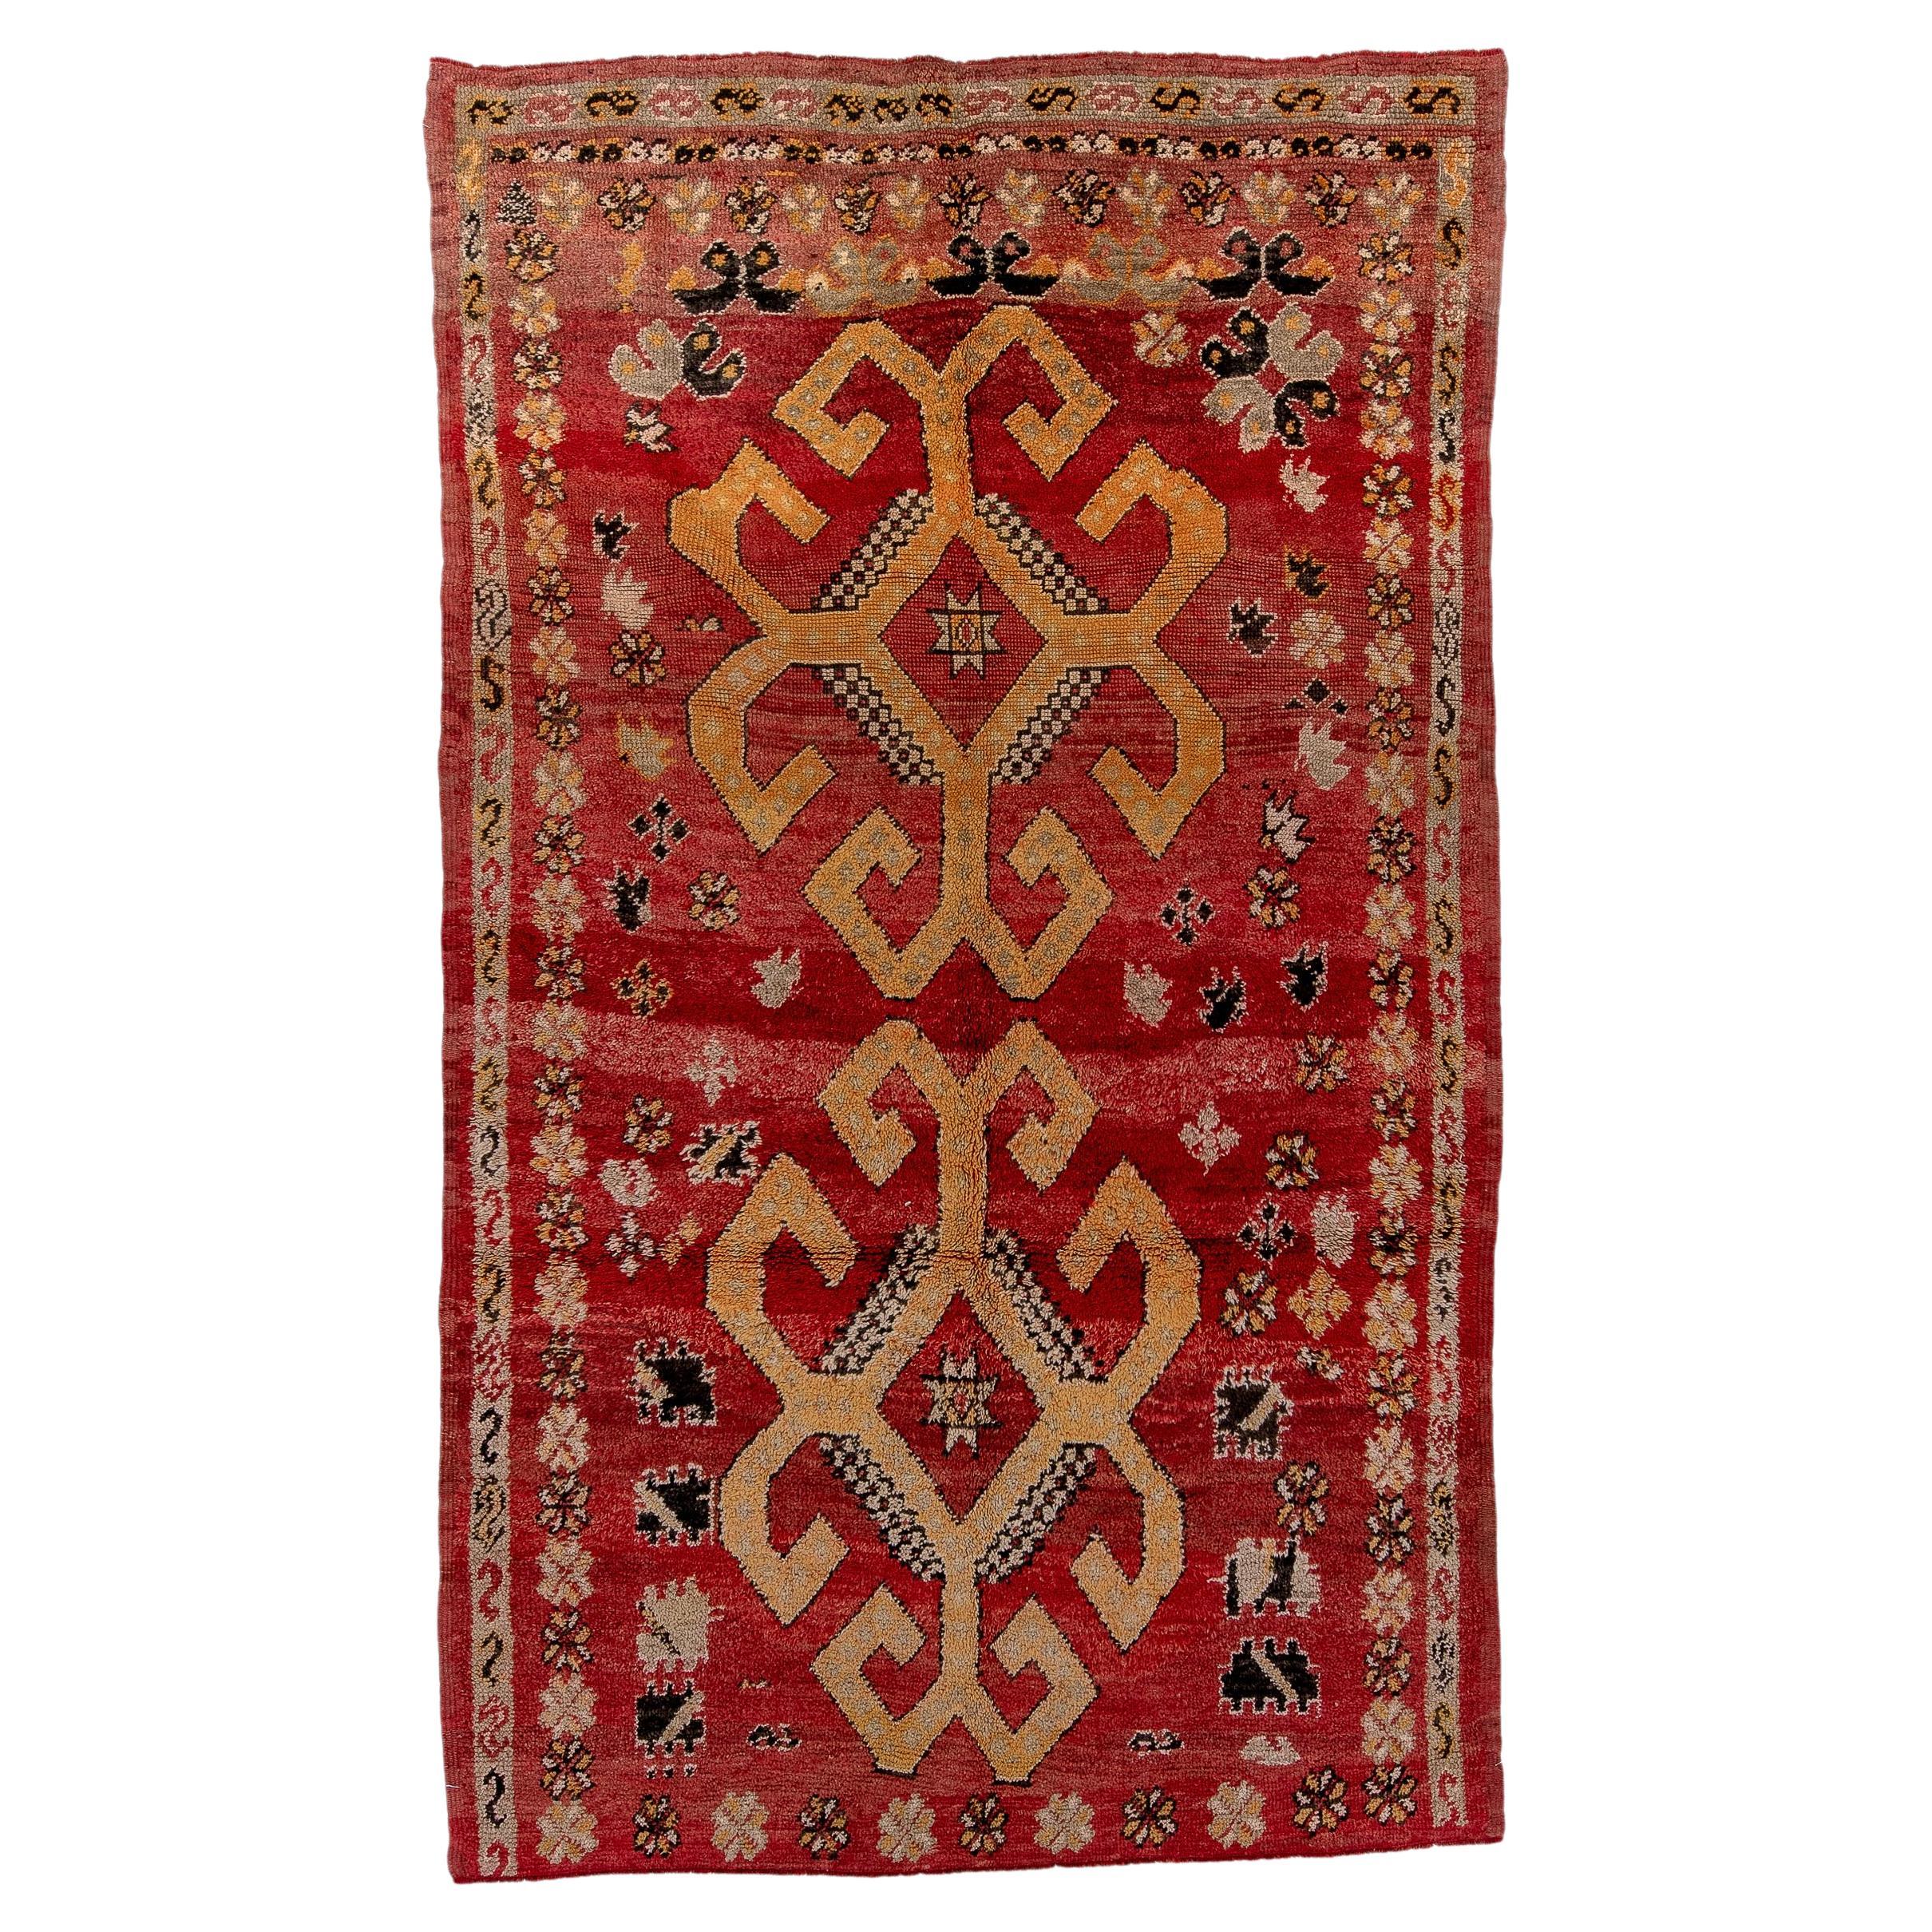 Double Medallion Moroccan Rug with Floral Geometric Motifs - Deep Red Old Gold